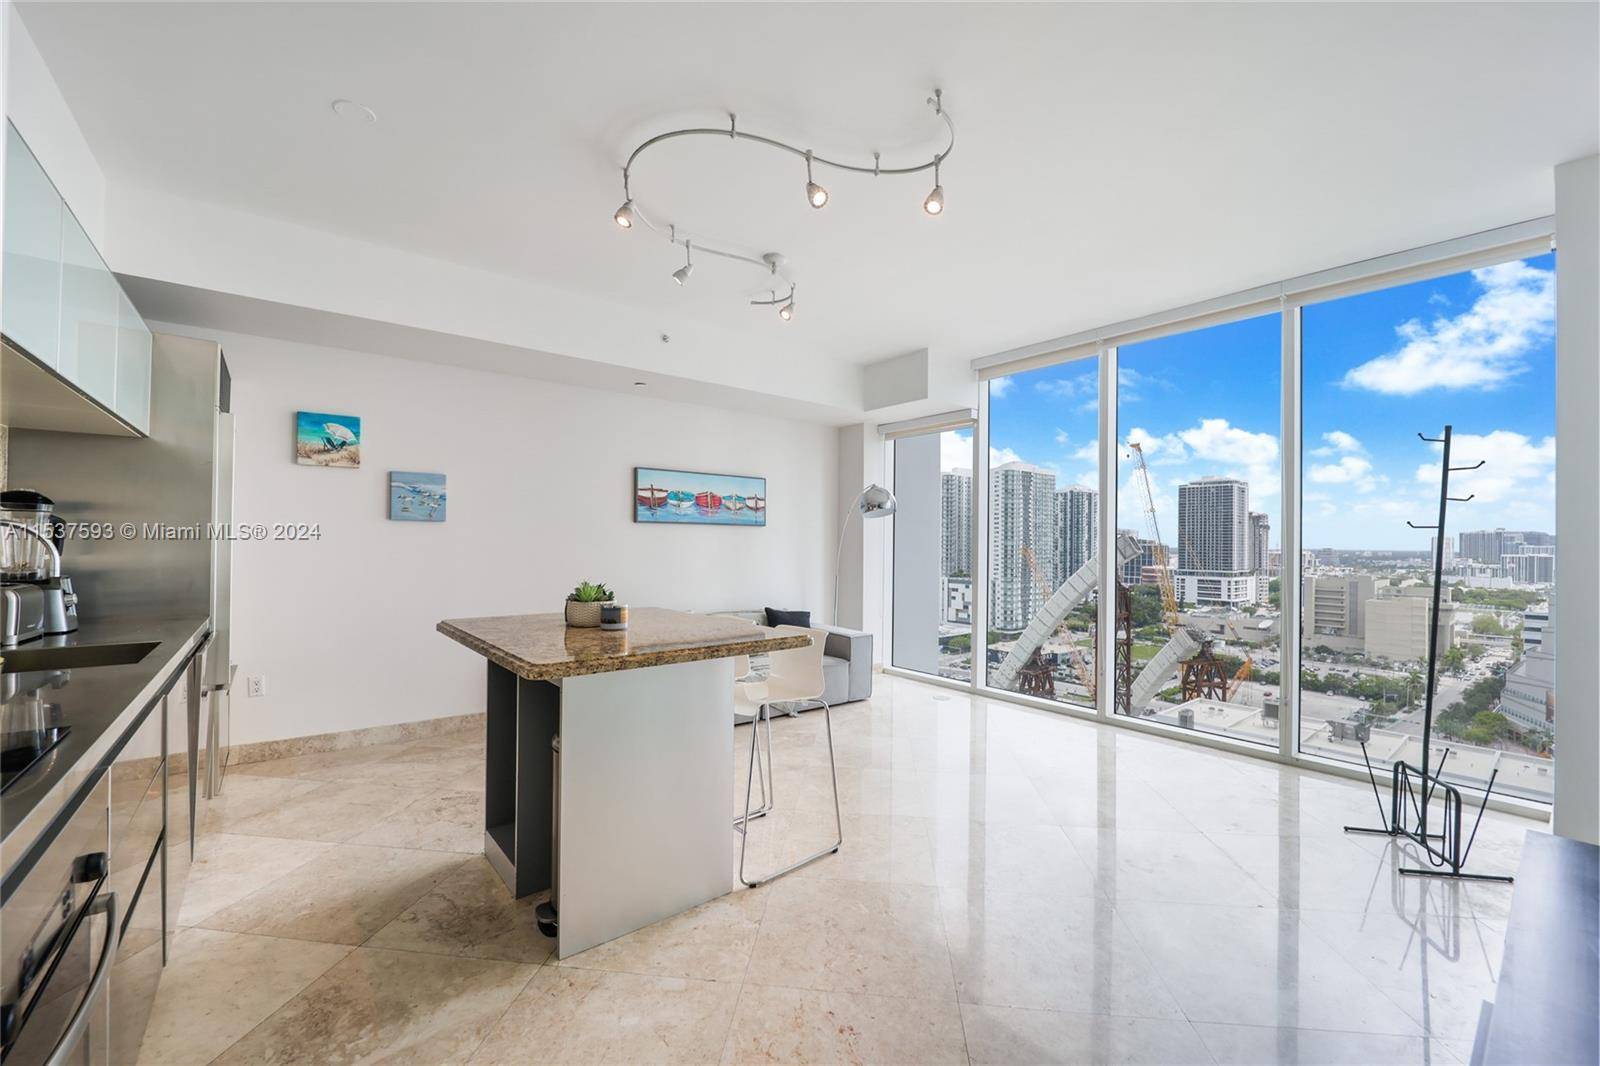 Cutting edge architecture by Chad Oppenheim, mesmerizing views, and one of the most sought after locations in town make this unit at Ten Museum Park a must see.